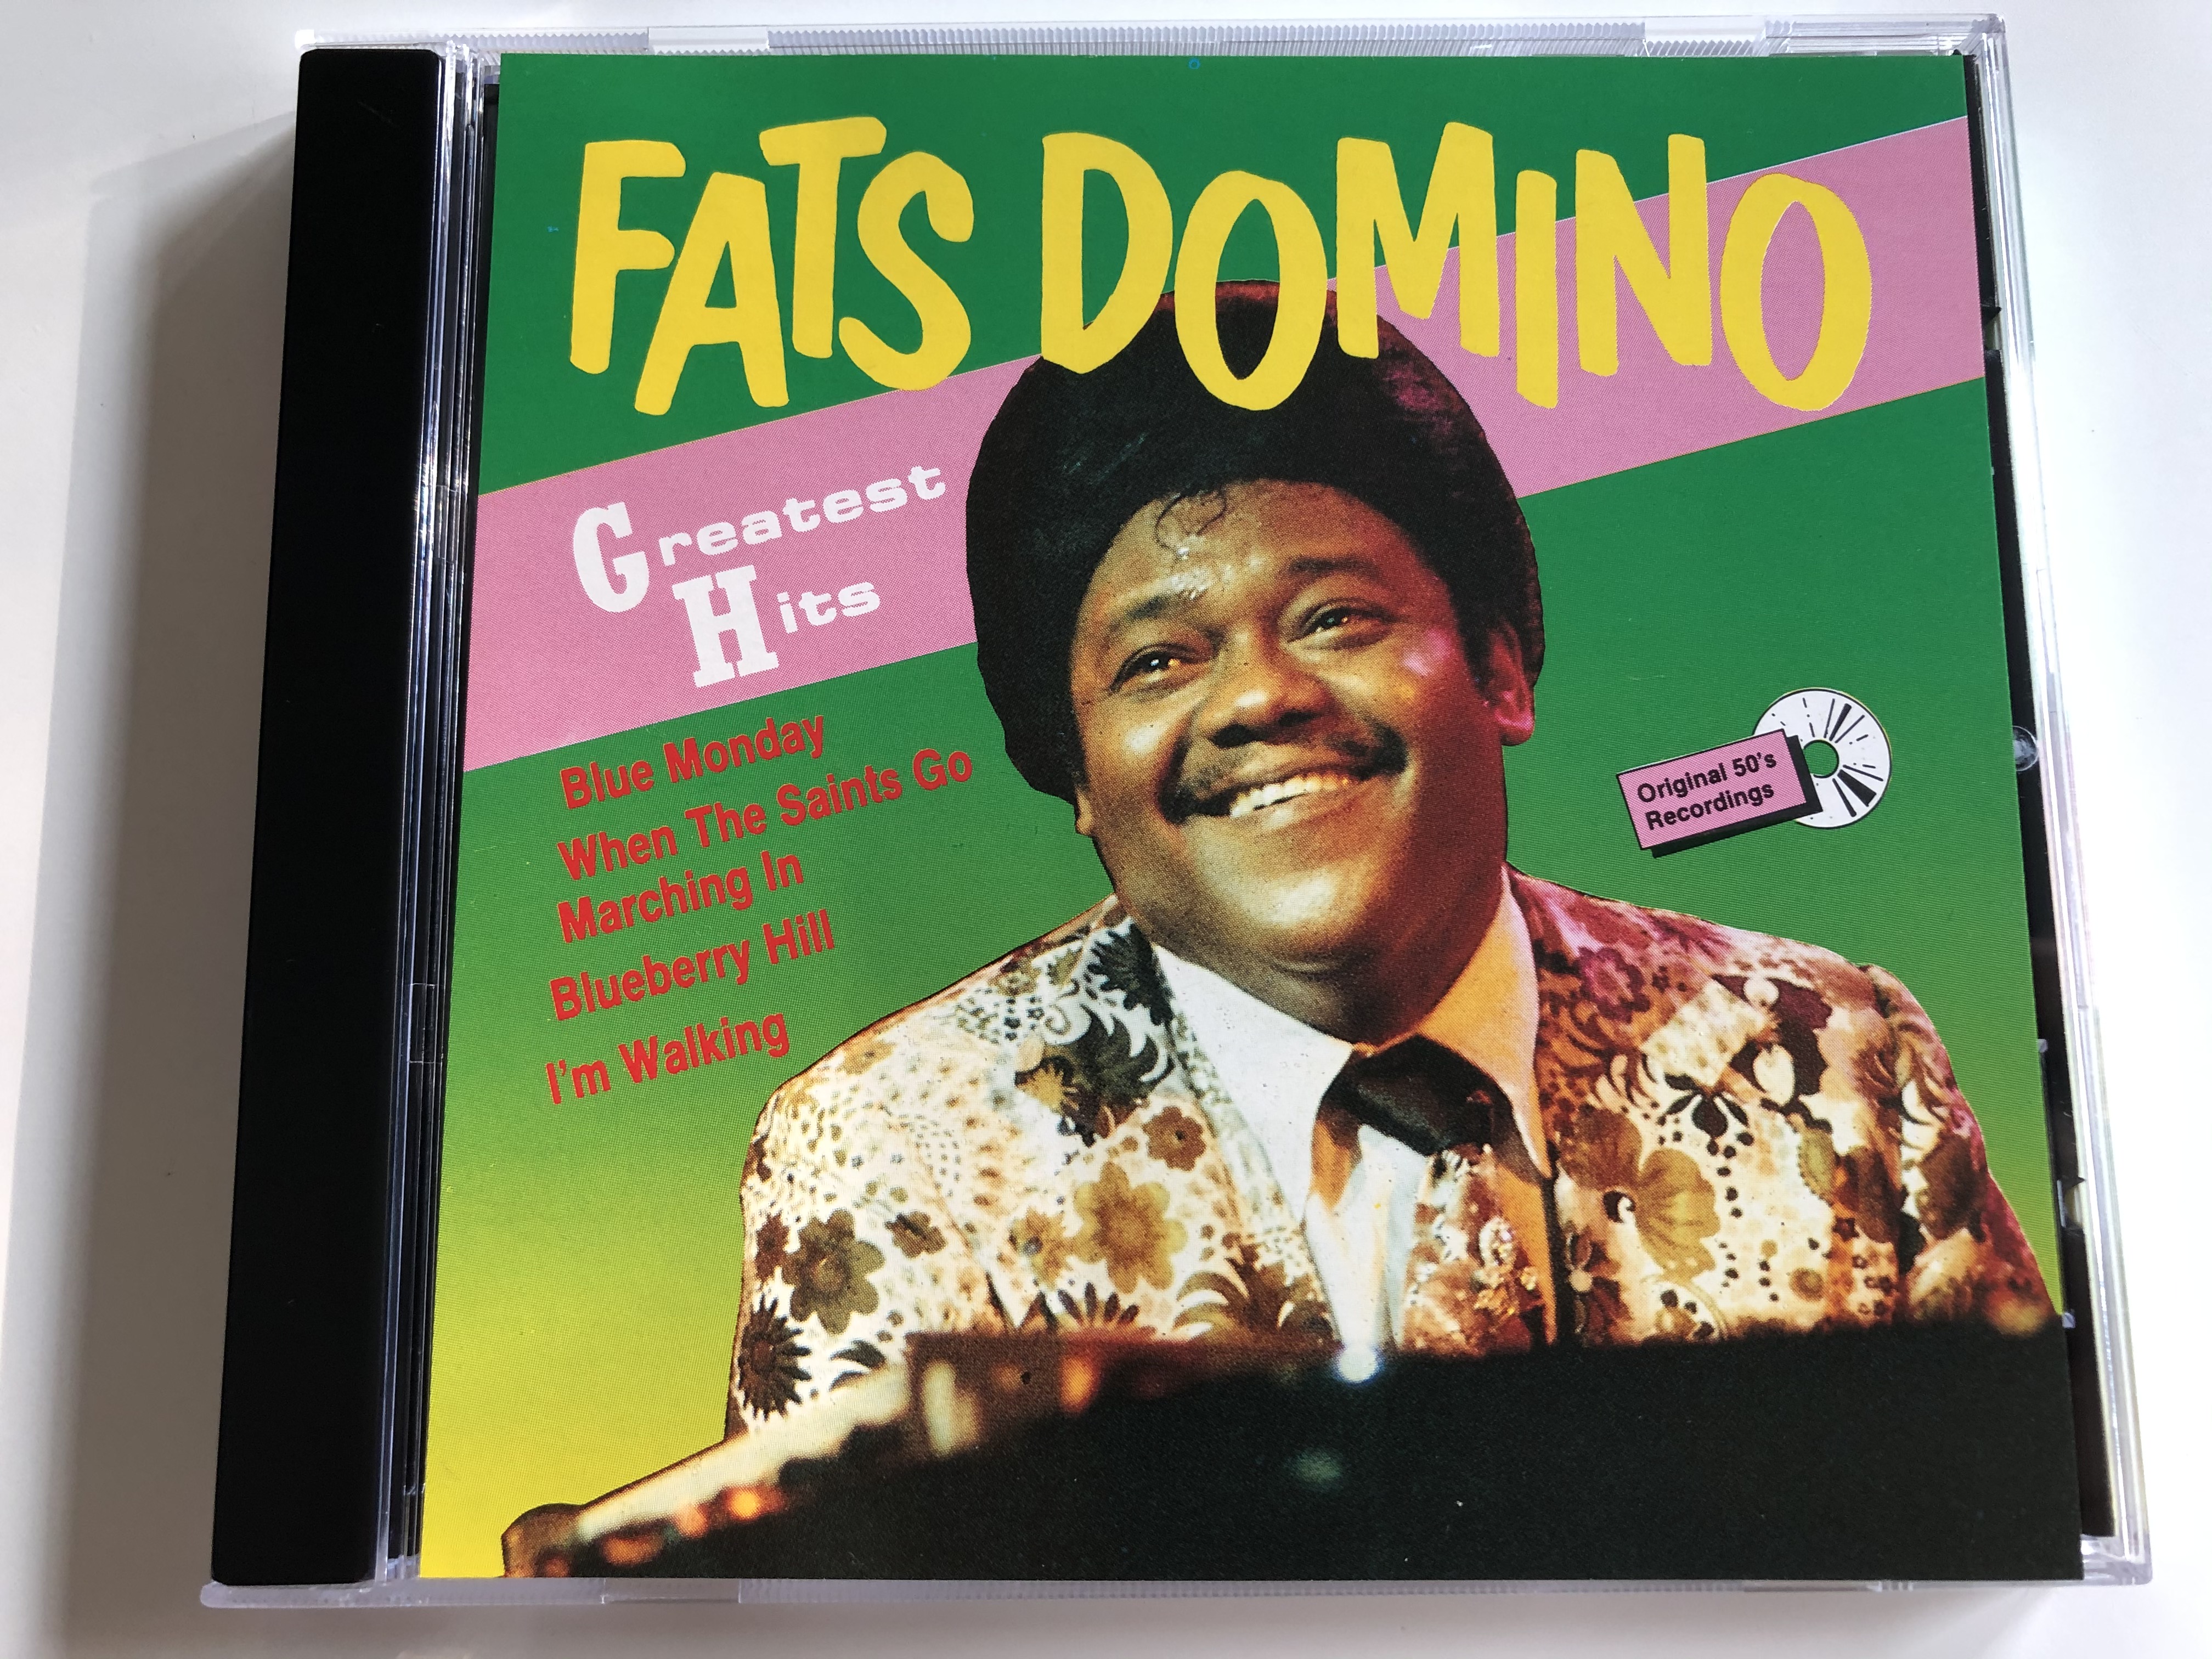 fats-domino-greatest-hits-blue-monday-when-the-saints-go-marching-in-blueberry-hill-i-m-walking-world-star-collection-audio-cd-wsc-99035-1-.jpg